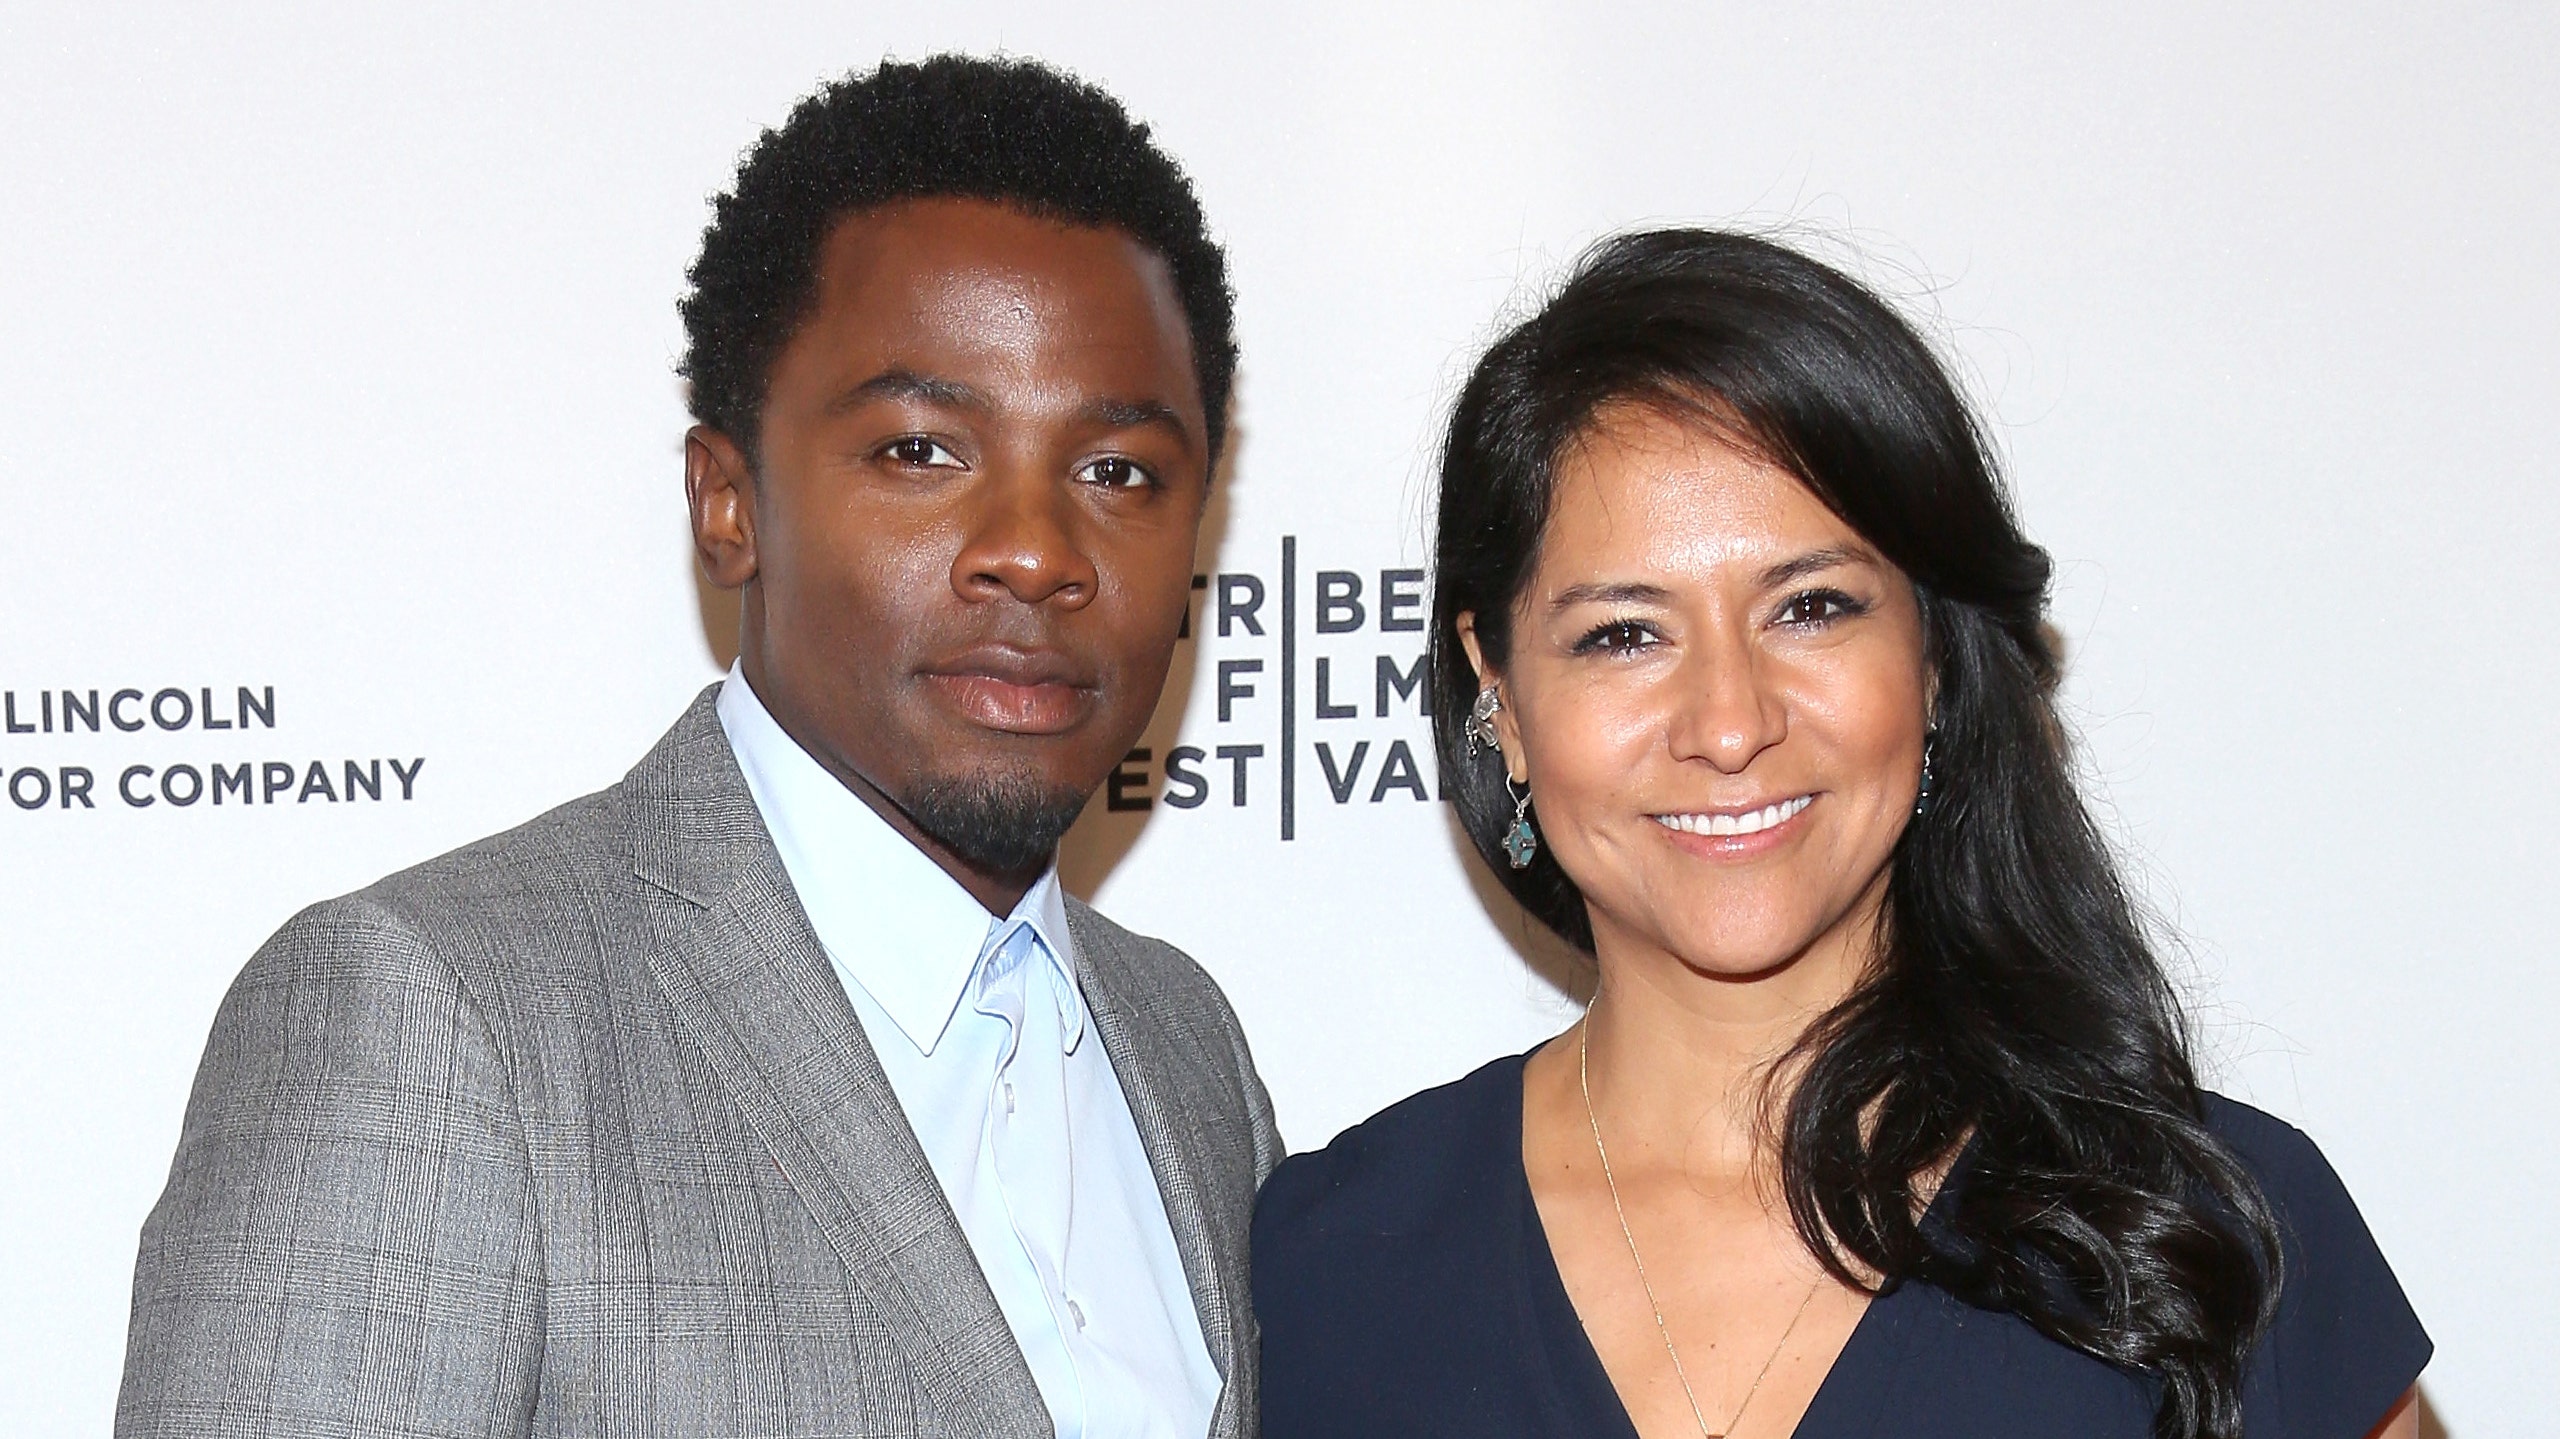 Empire actor Derek Luke shuts down haters, defends 17-year marriage to Hispanic wife Fox News picture